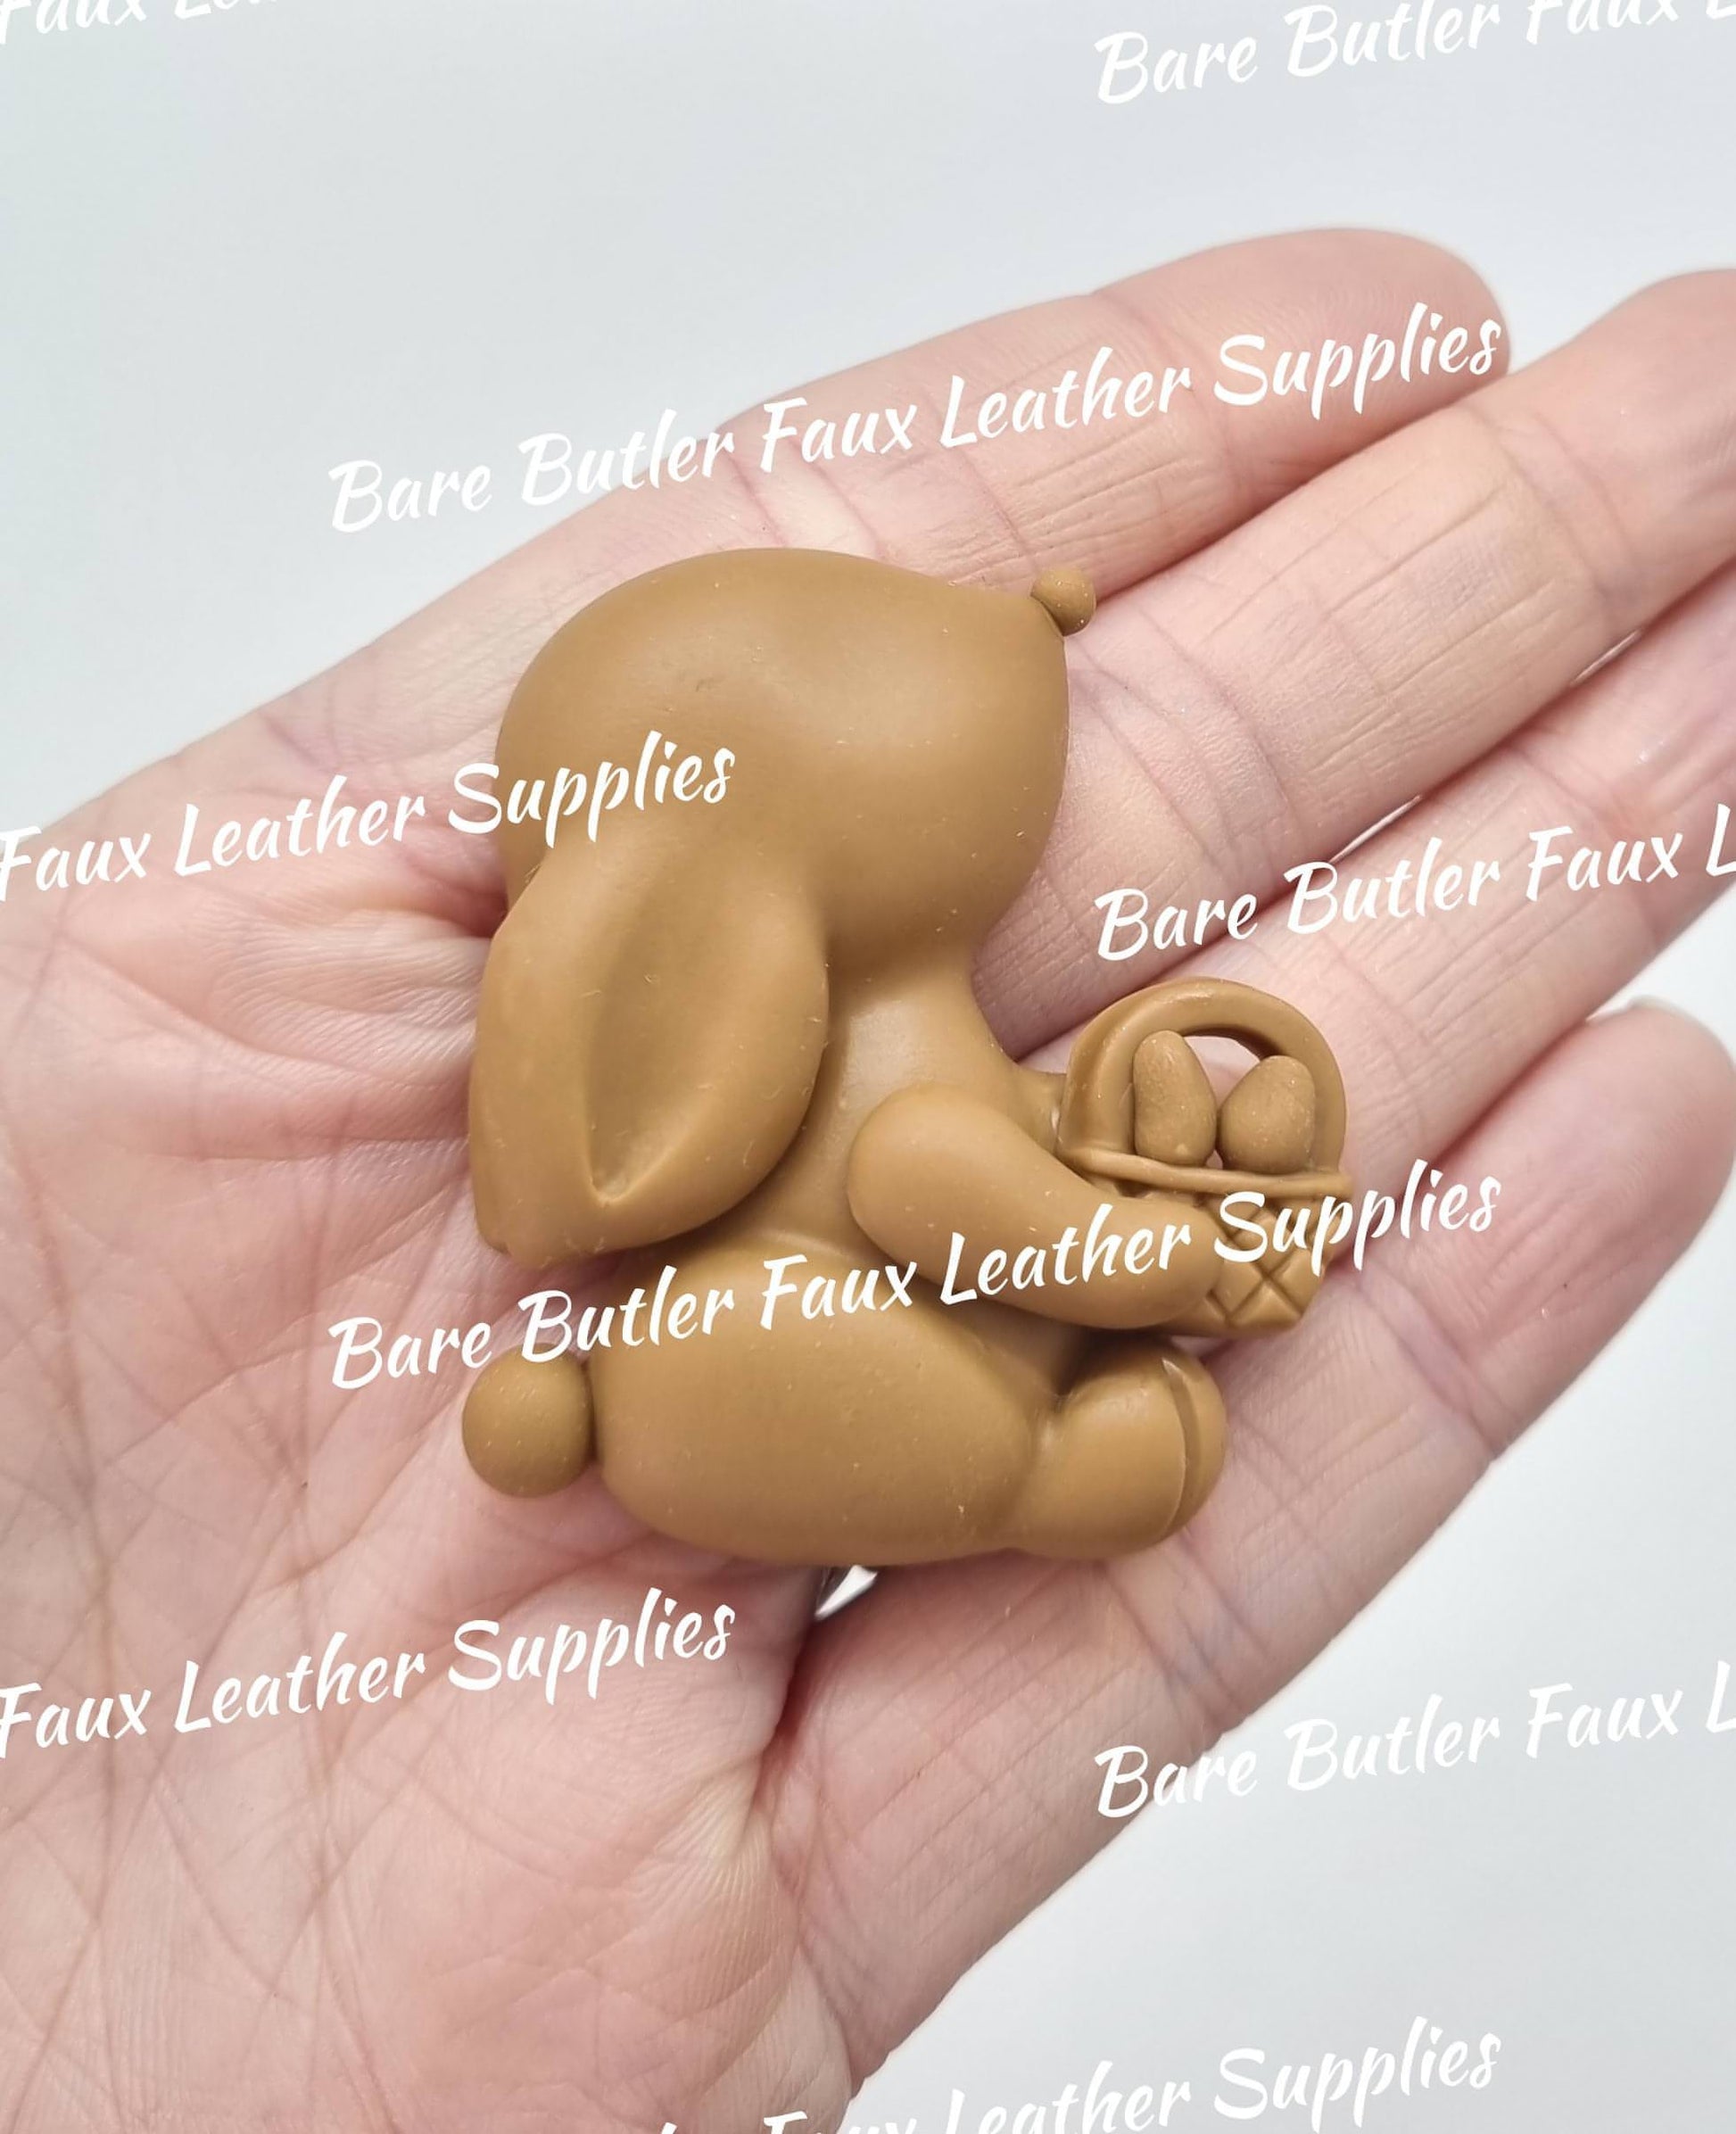 Chocolate Bunny - Bare Butler Faux Leather Supplies 